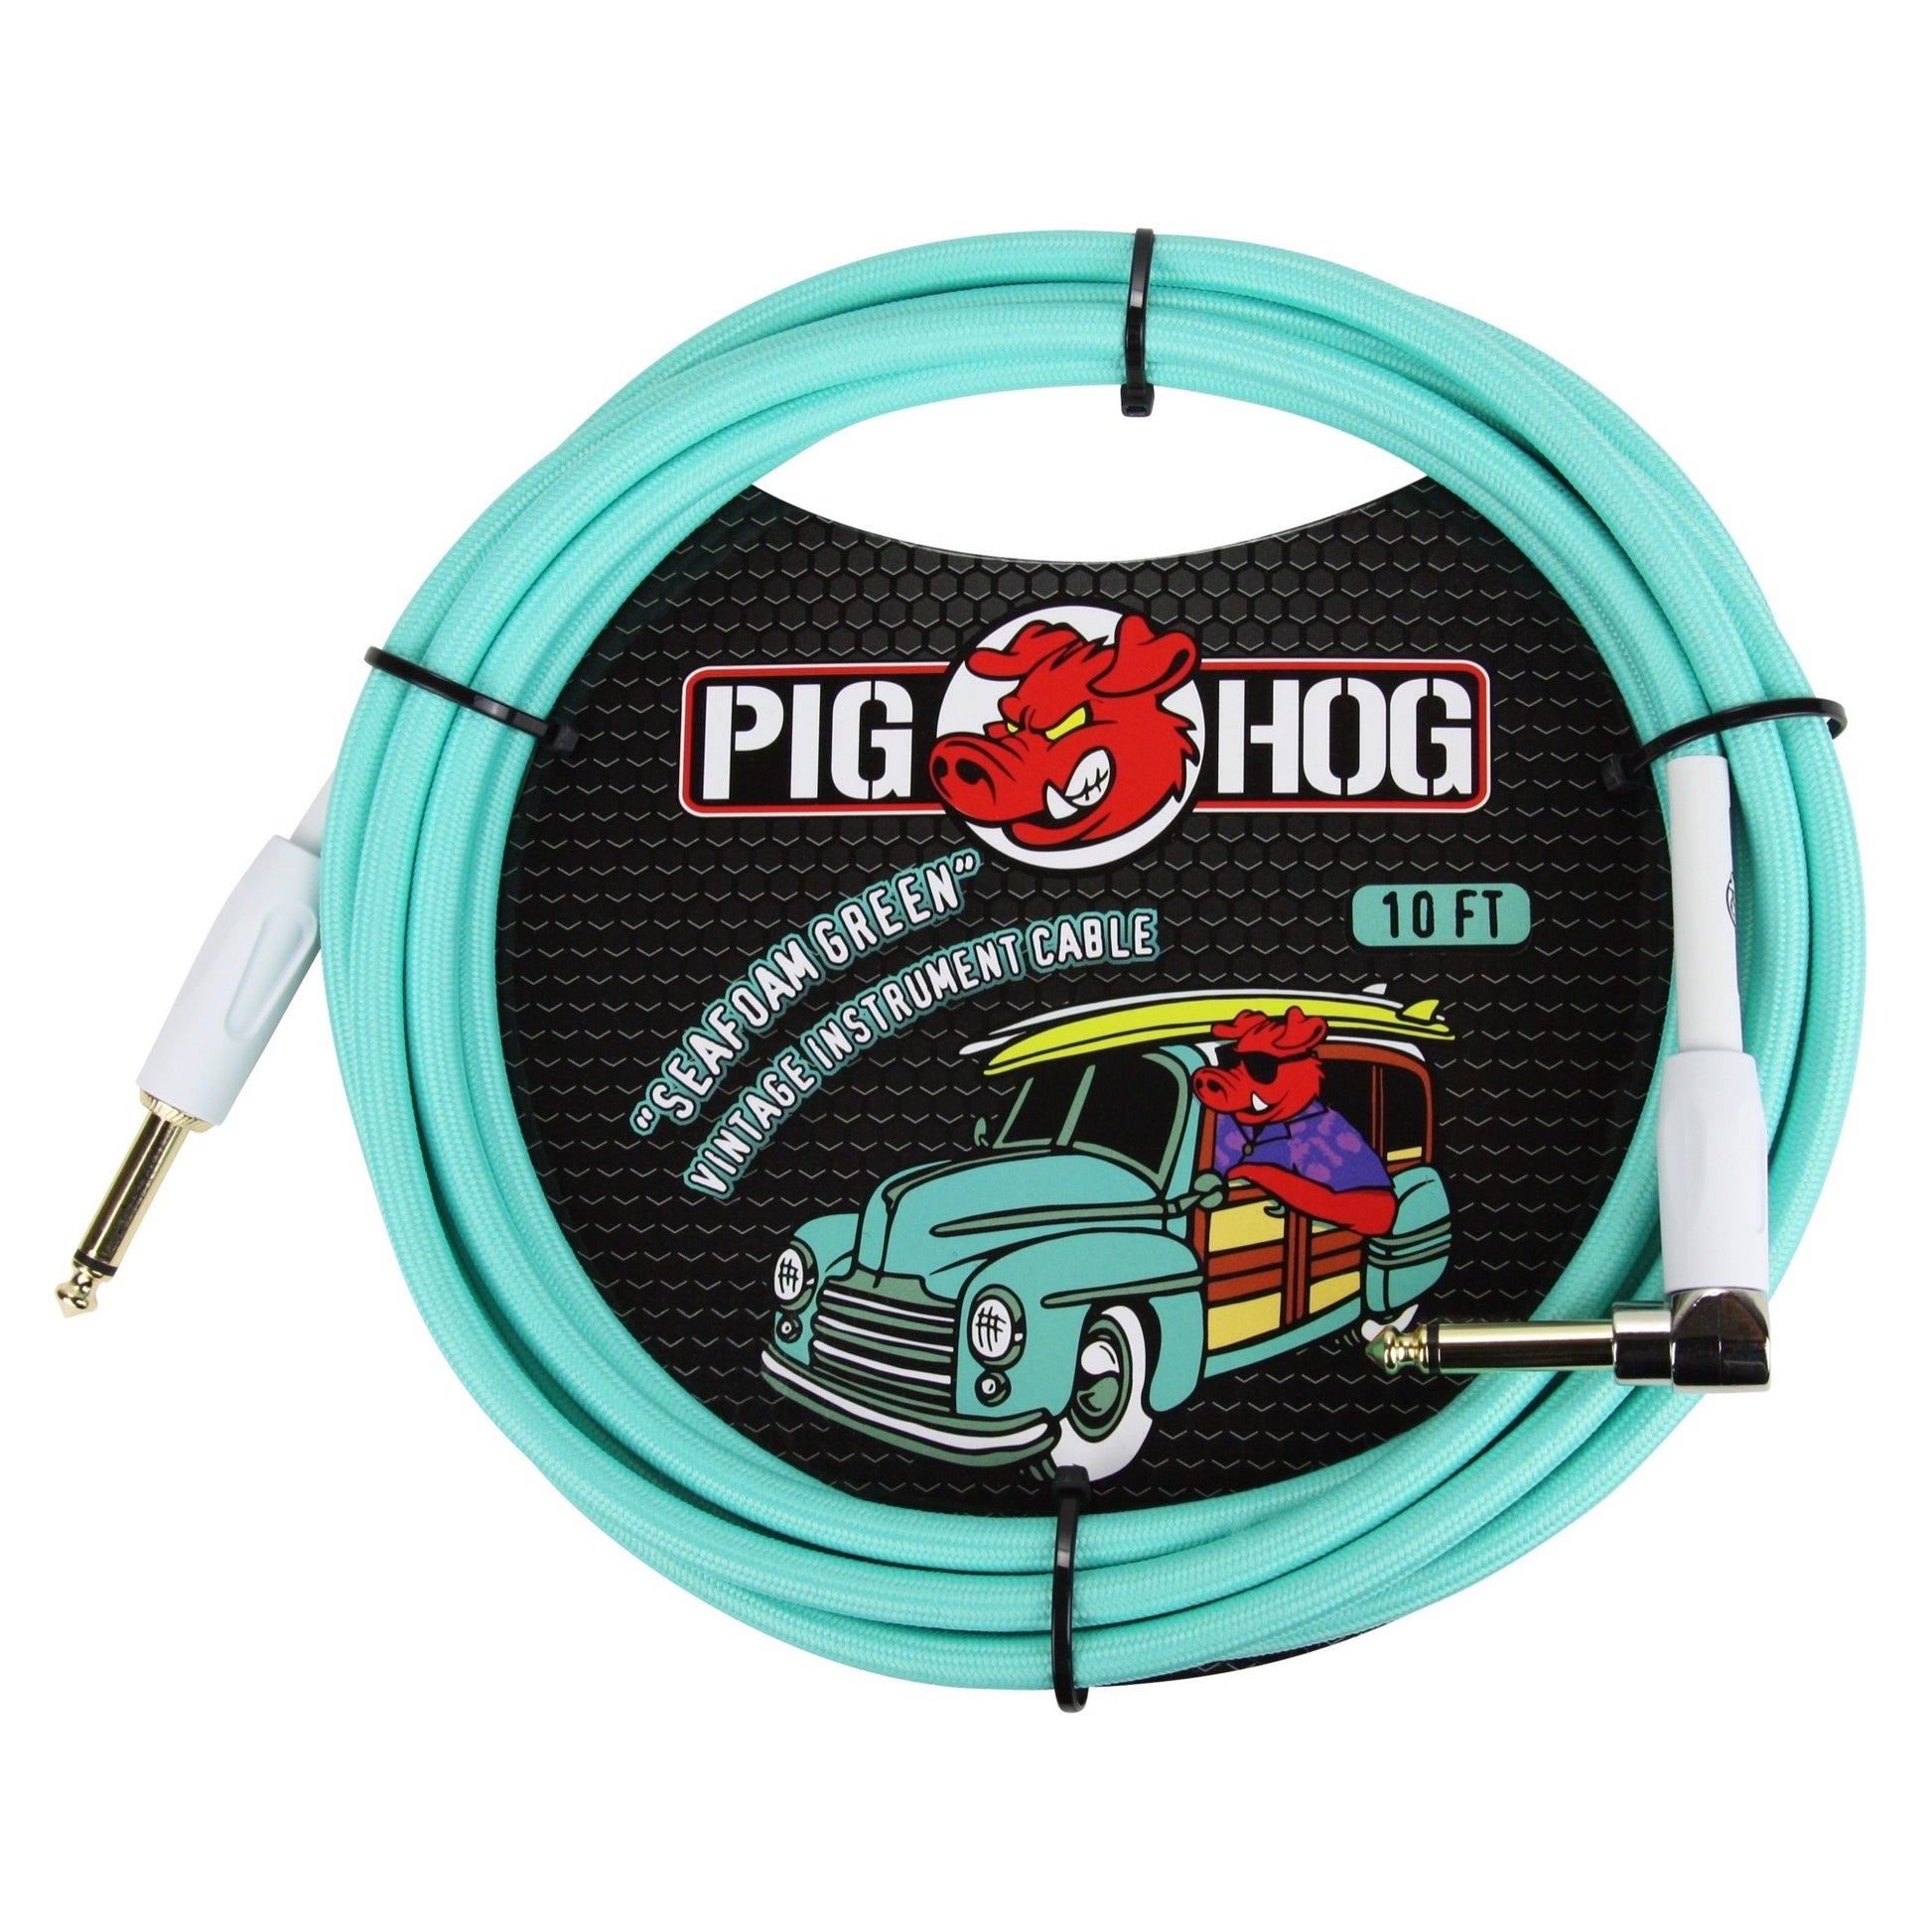 Pig Hog Color Instrument Cable, 1/4 Inch Straight to 1/4 Inch Right Angle, Sea Foam Green, 10 Foot